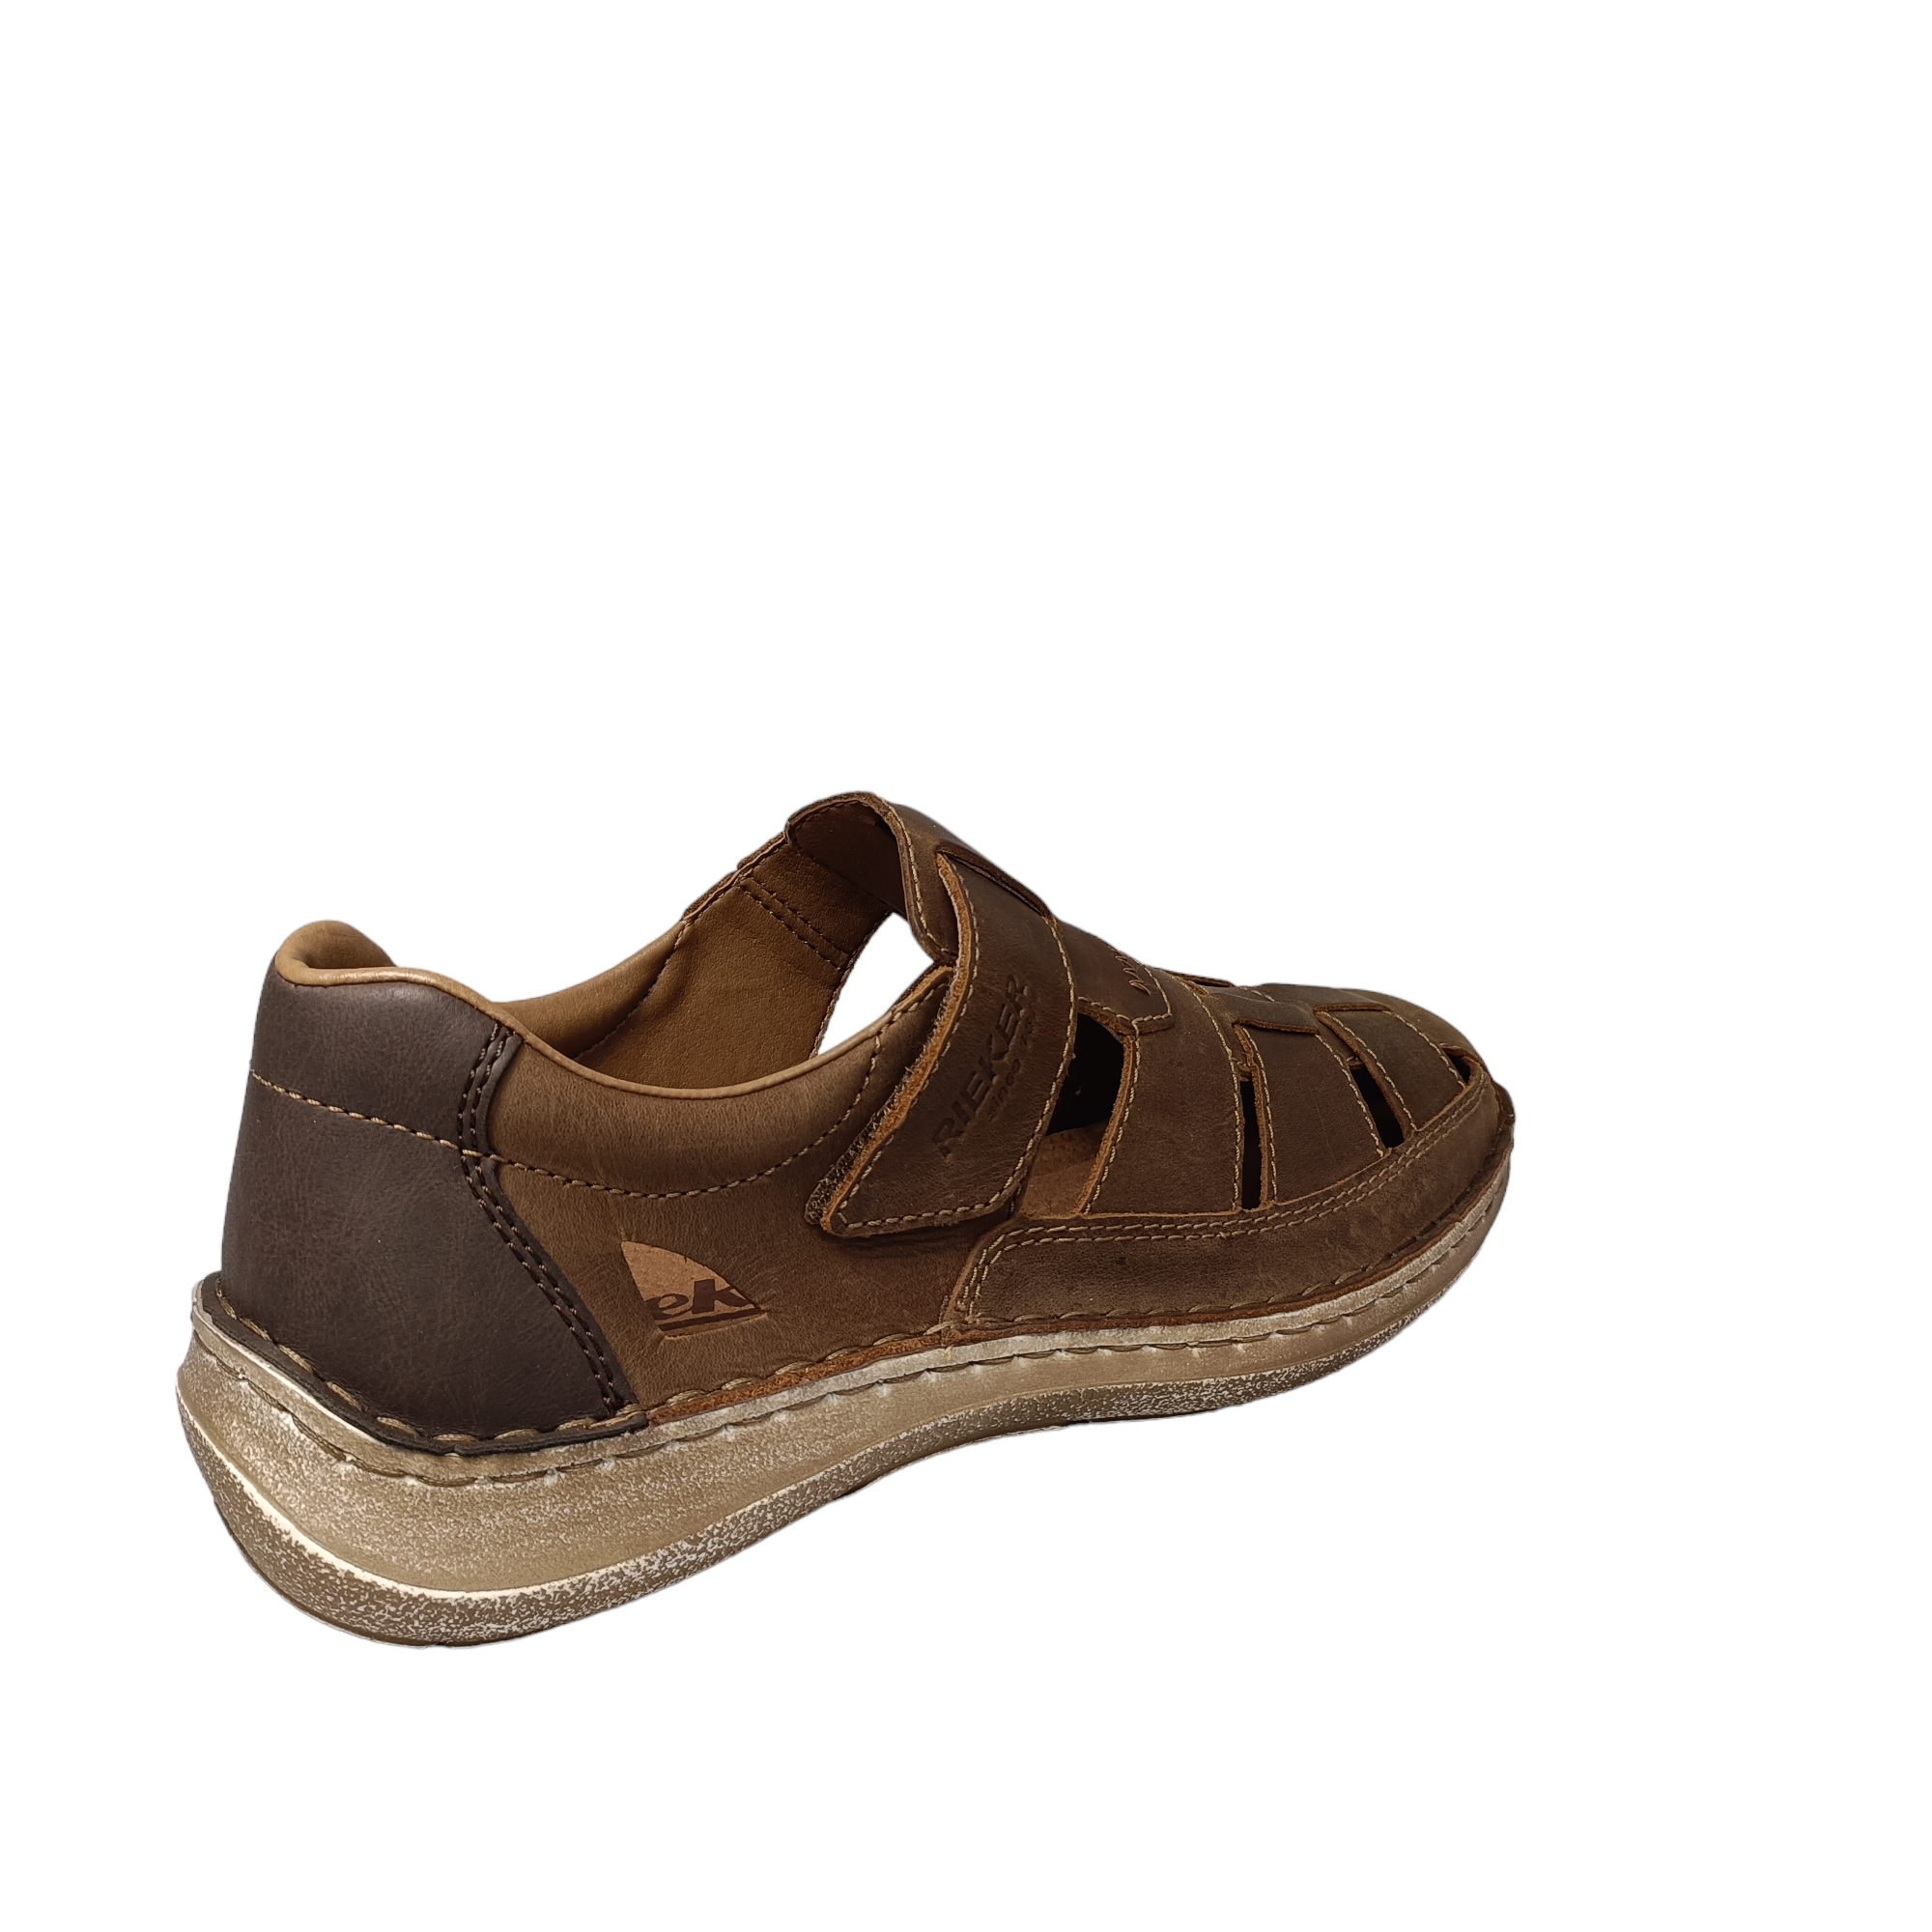 Shop 03078 Mens Rieker - with shoe&me - from Rieker - Shoes - Mens, Shoe, Summer - [collection]